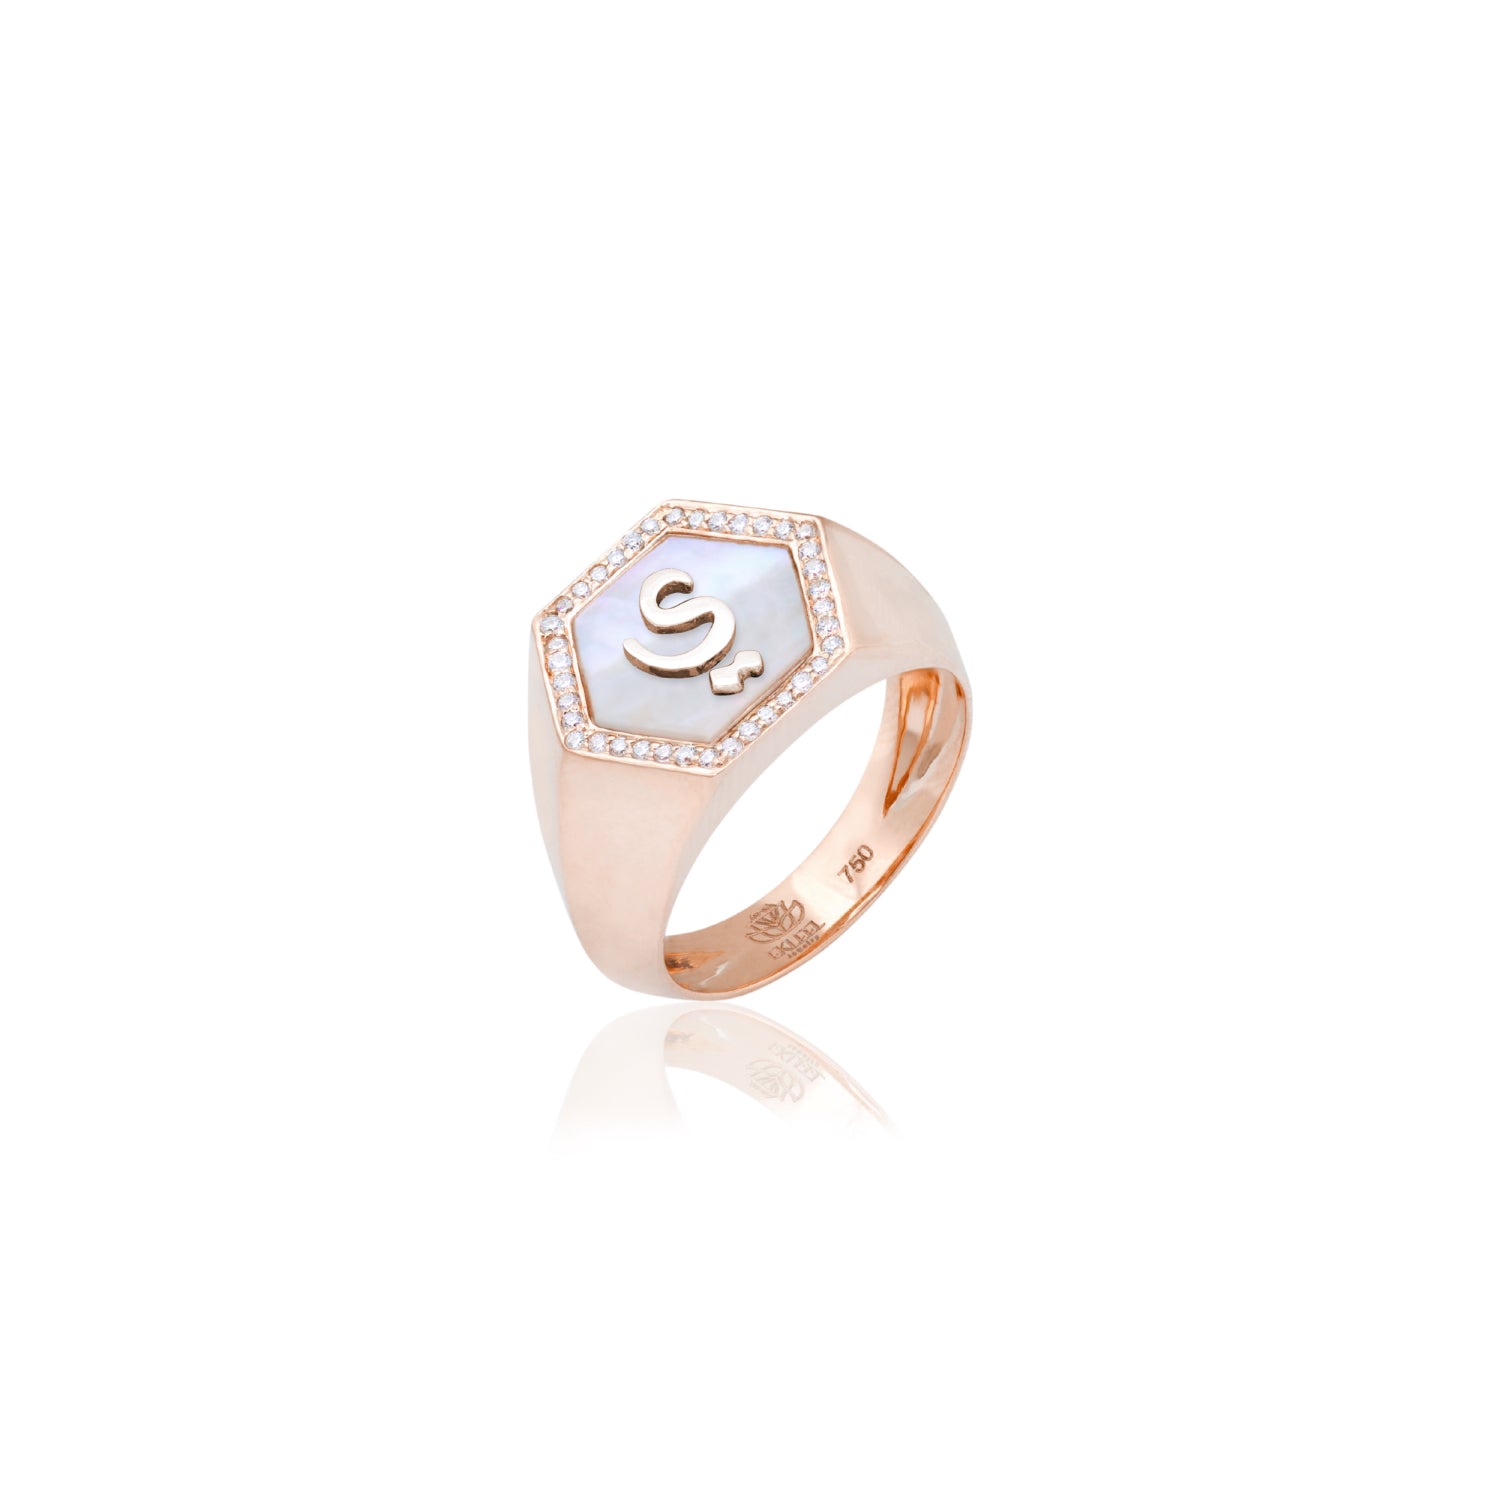 Qamoos 2.0 Letter ي White Mother of Pearl and Diamond Signet Ring in Rose Gold